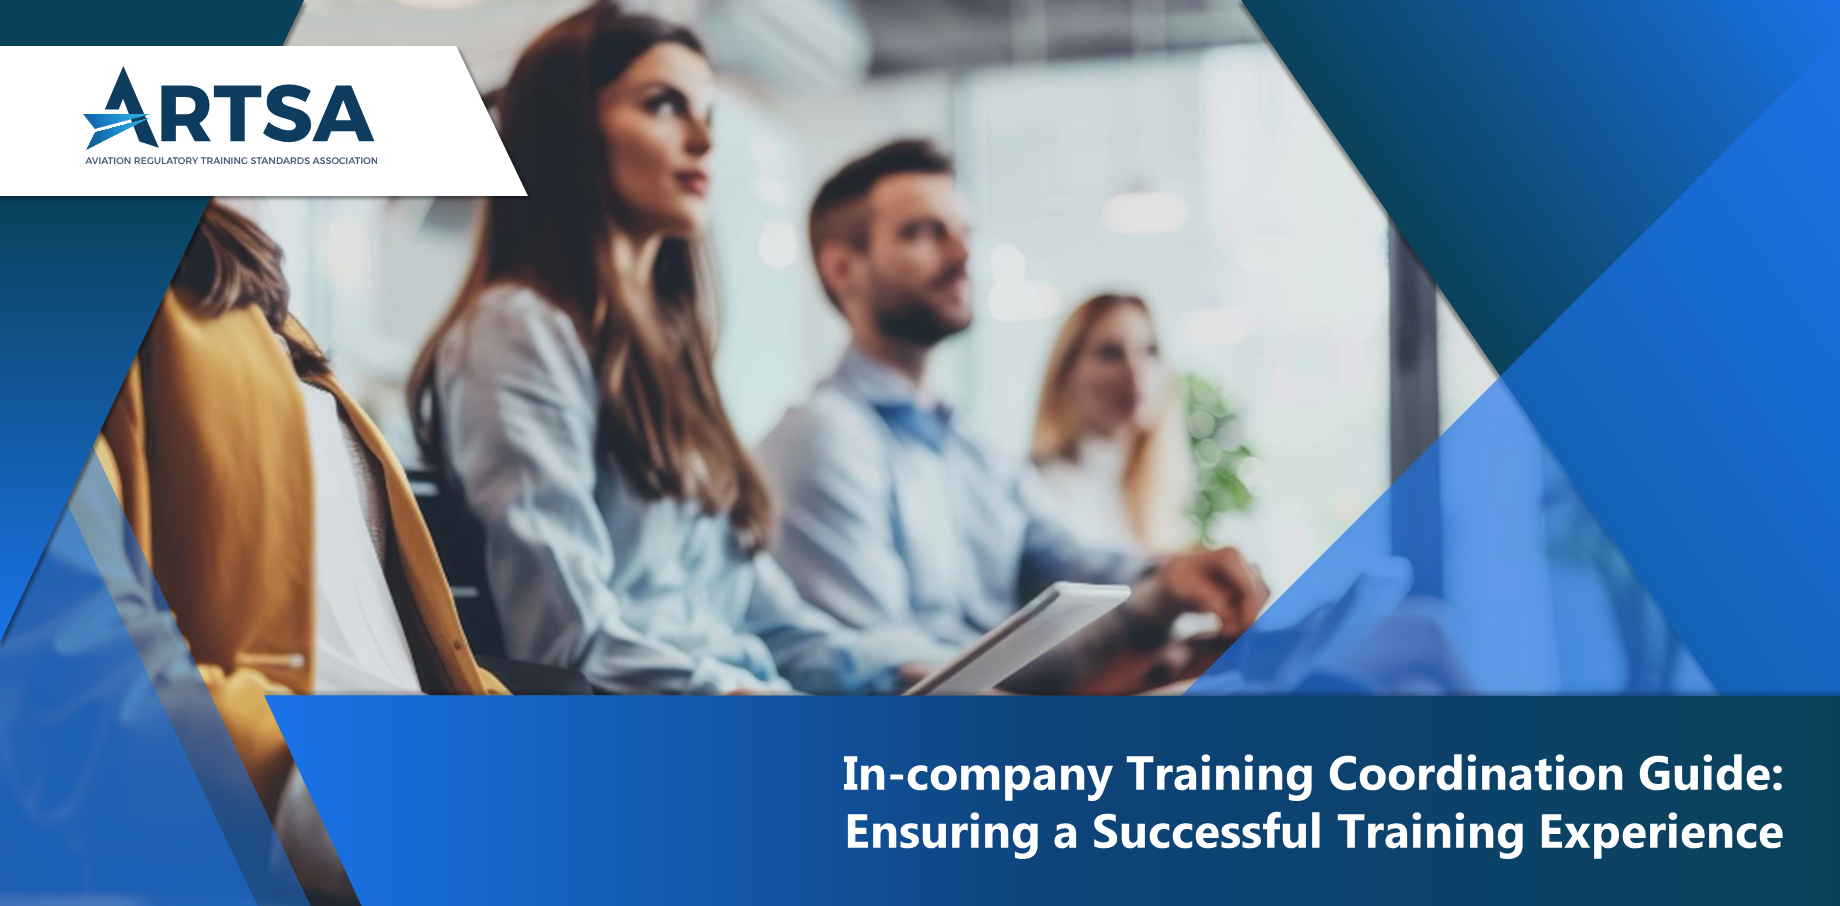 In-company Training Coordination Guide: Ensuring a Successful Training Experience